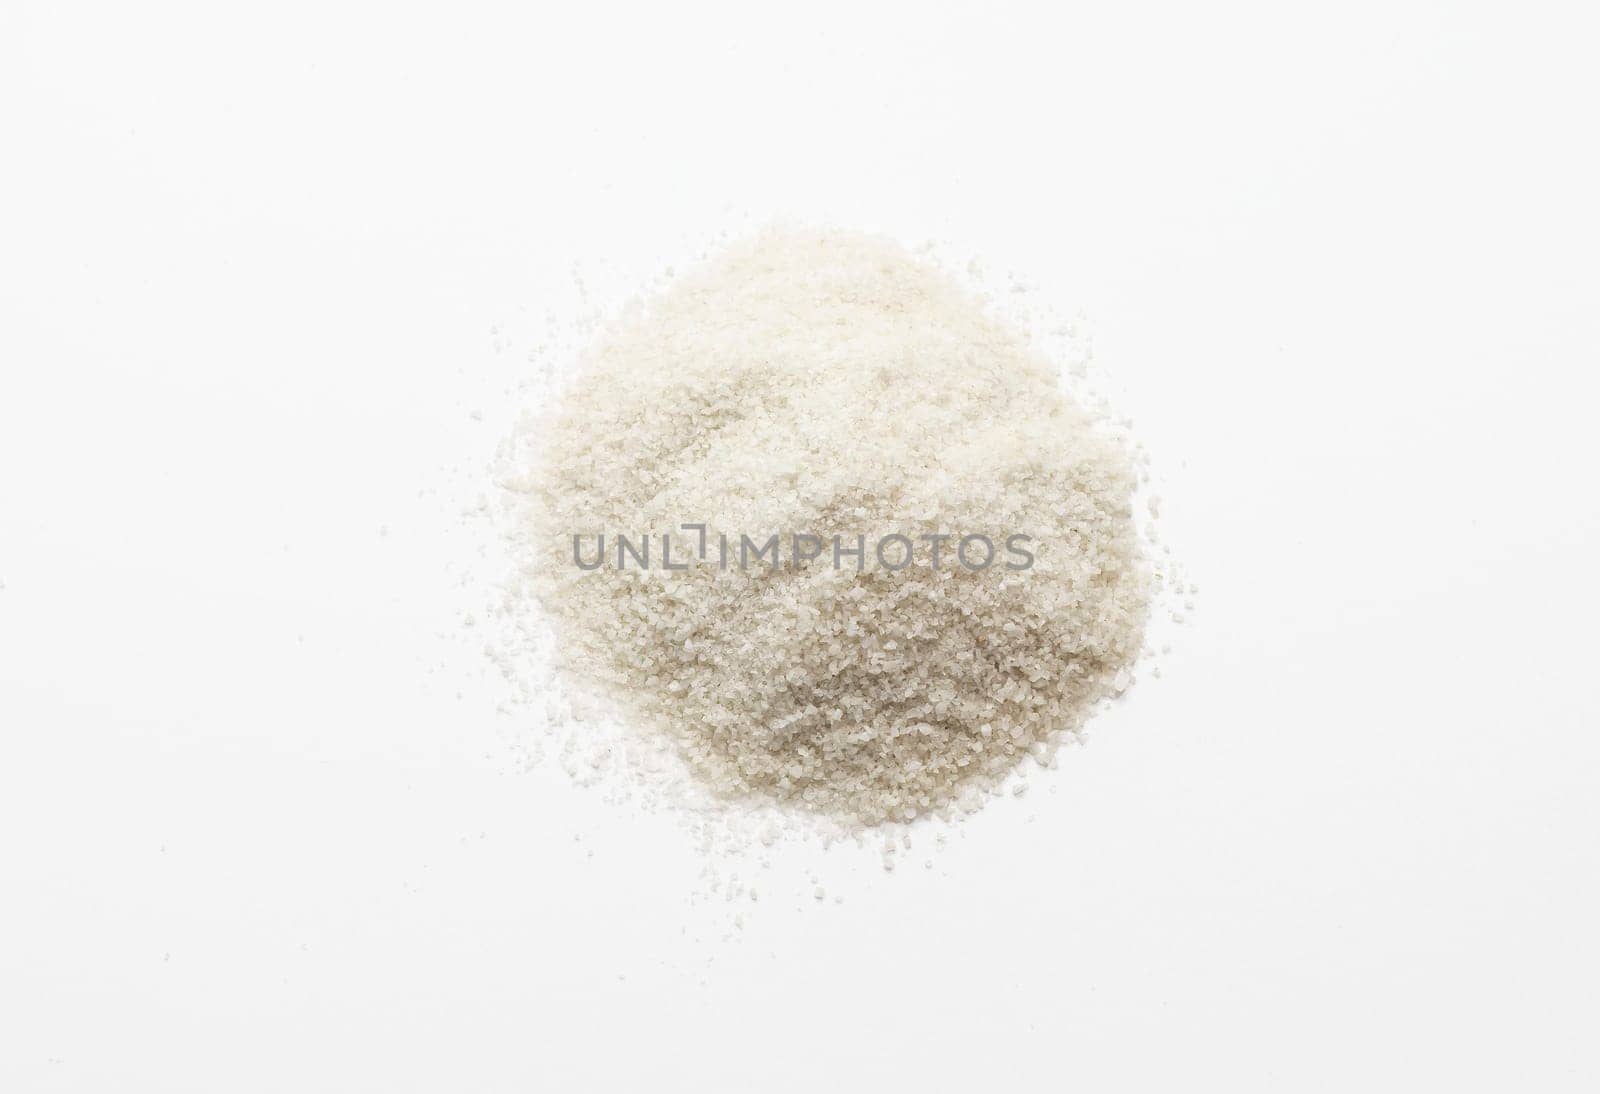 Isolated Celtic Gray Sea Salt On White Background, Top View. Horizontal Plane. Natural And Unrefined Salt Harvested From Brittany, France. Natural Minerals And Trace Elements, Superfood by netatsi